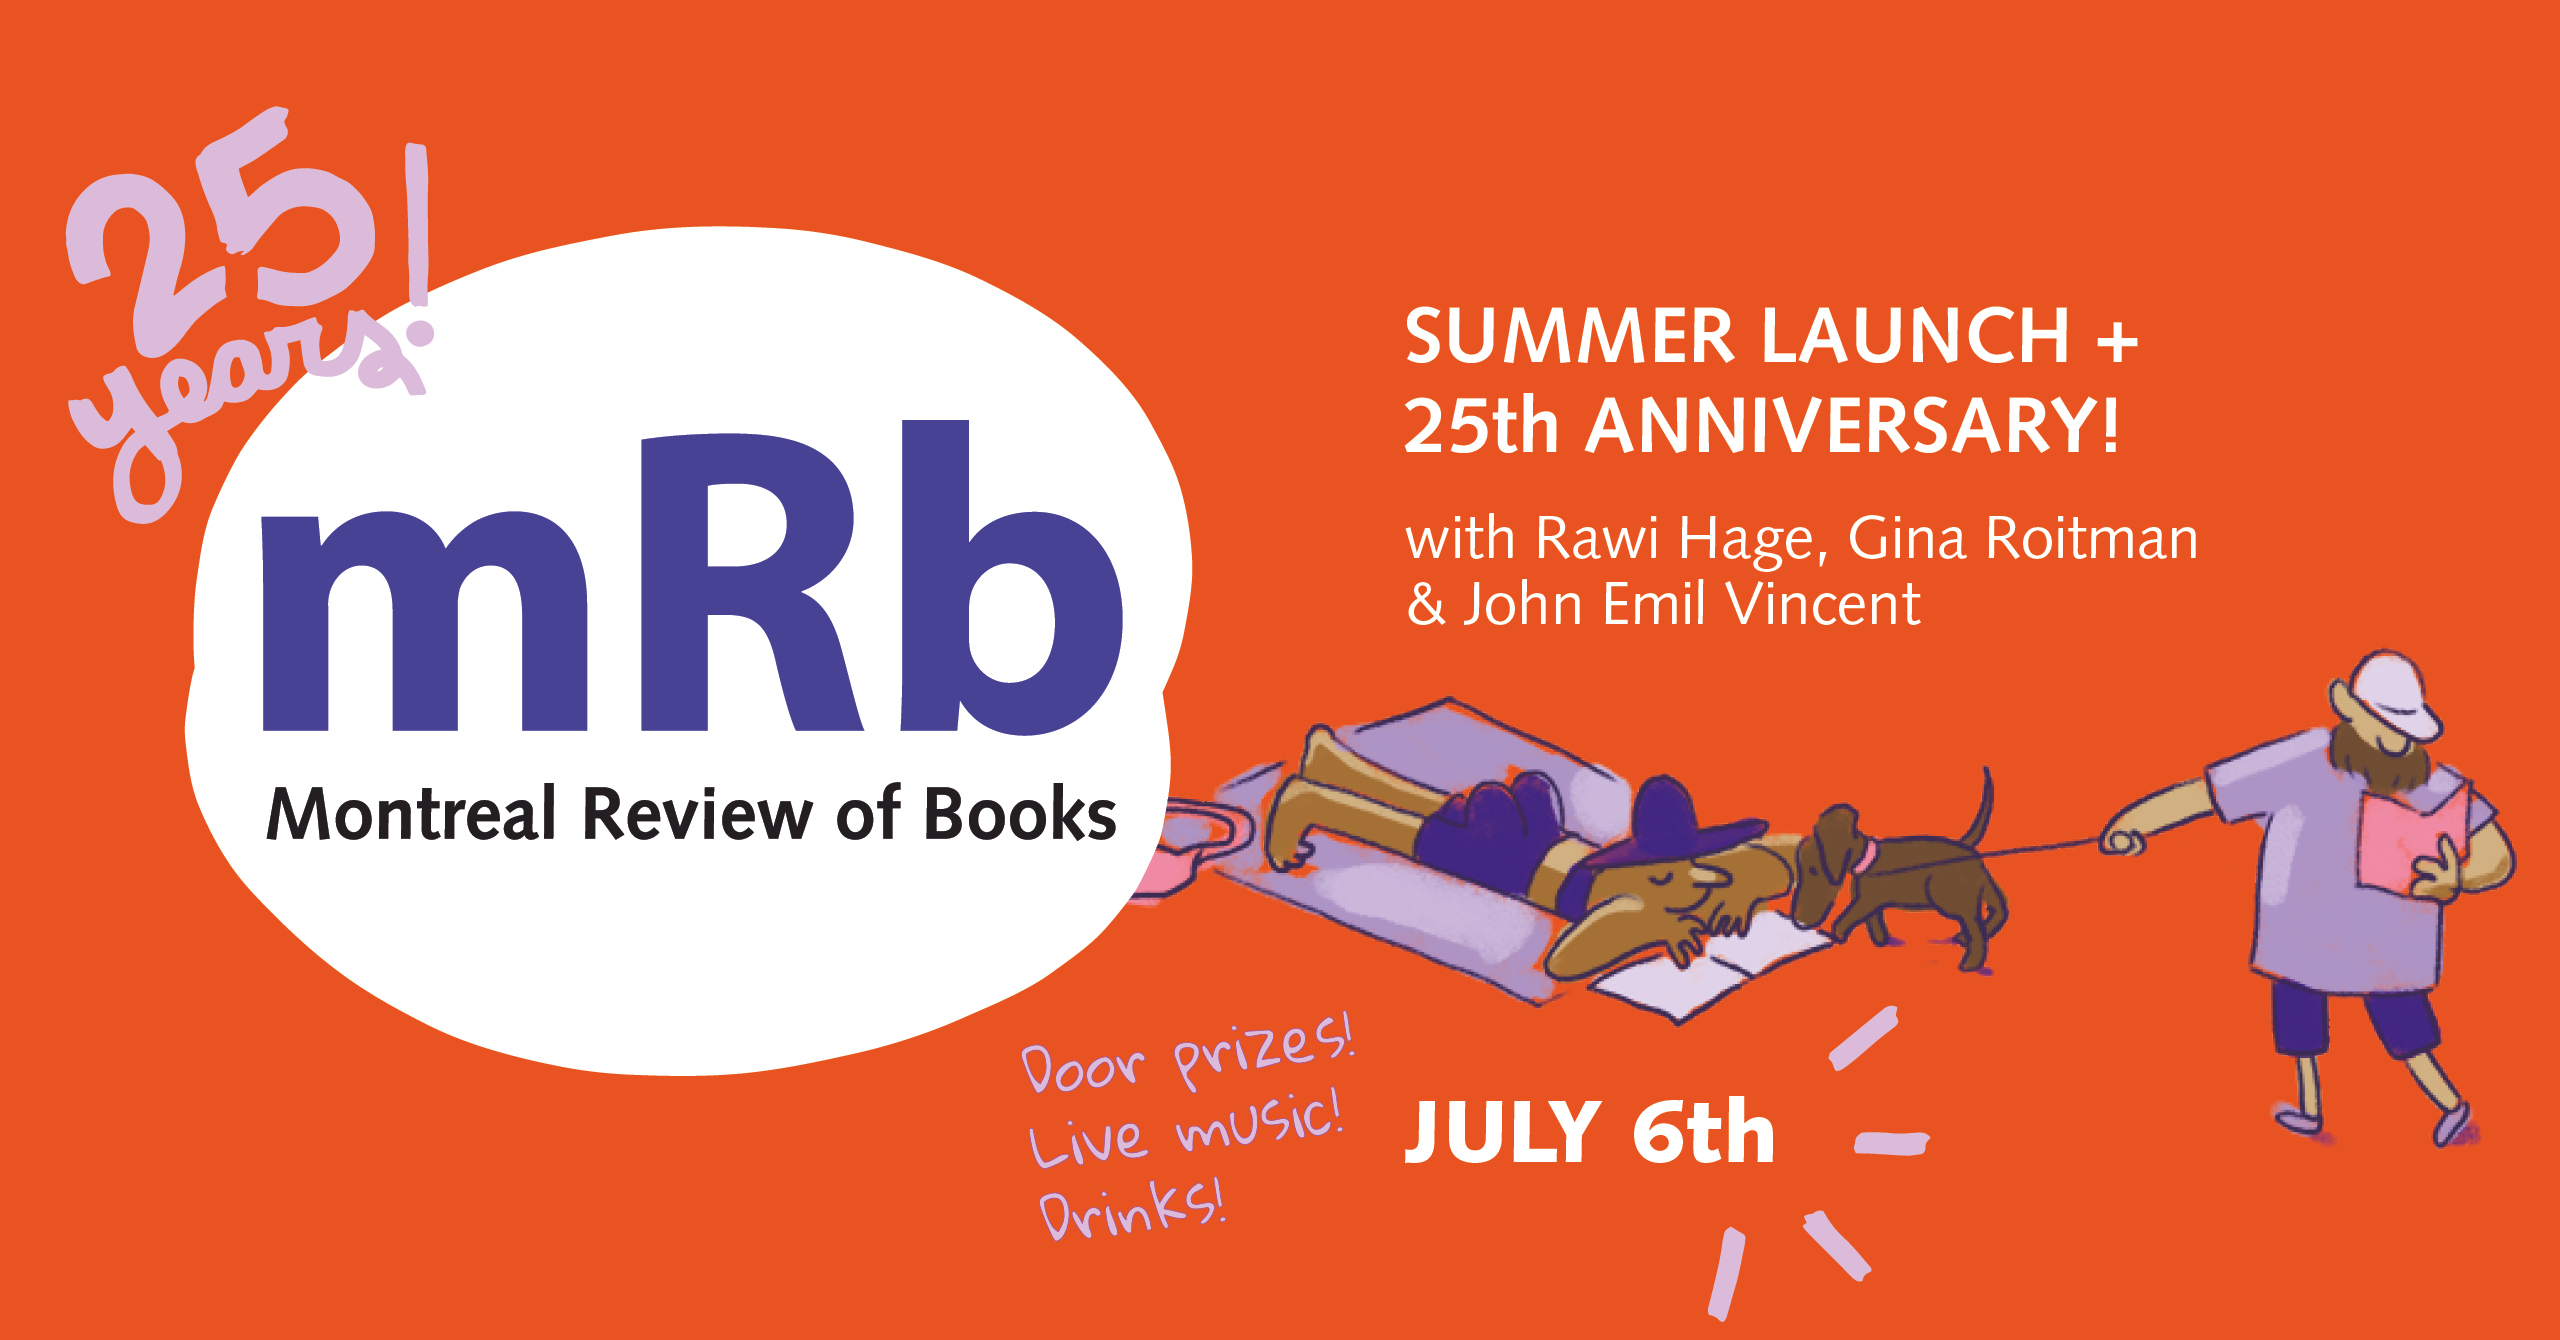 TONIGHT: Montreal Review of Books 25th anniversary party at Cardinal Tea Room